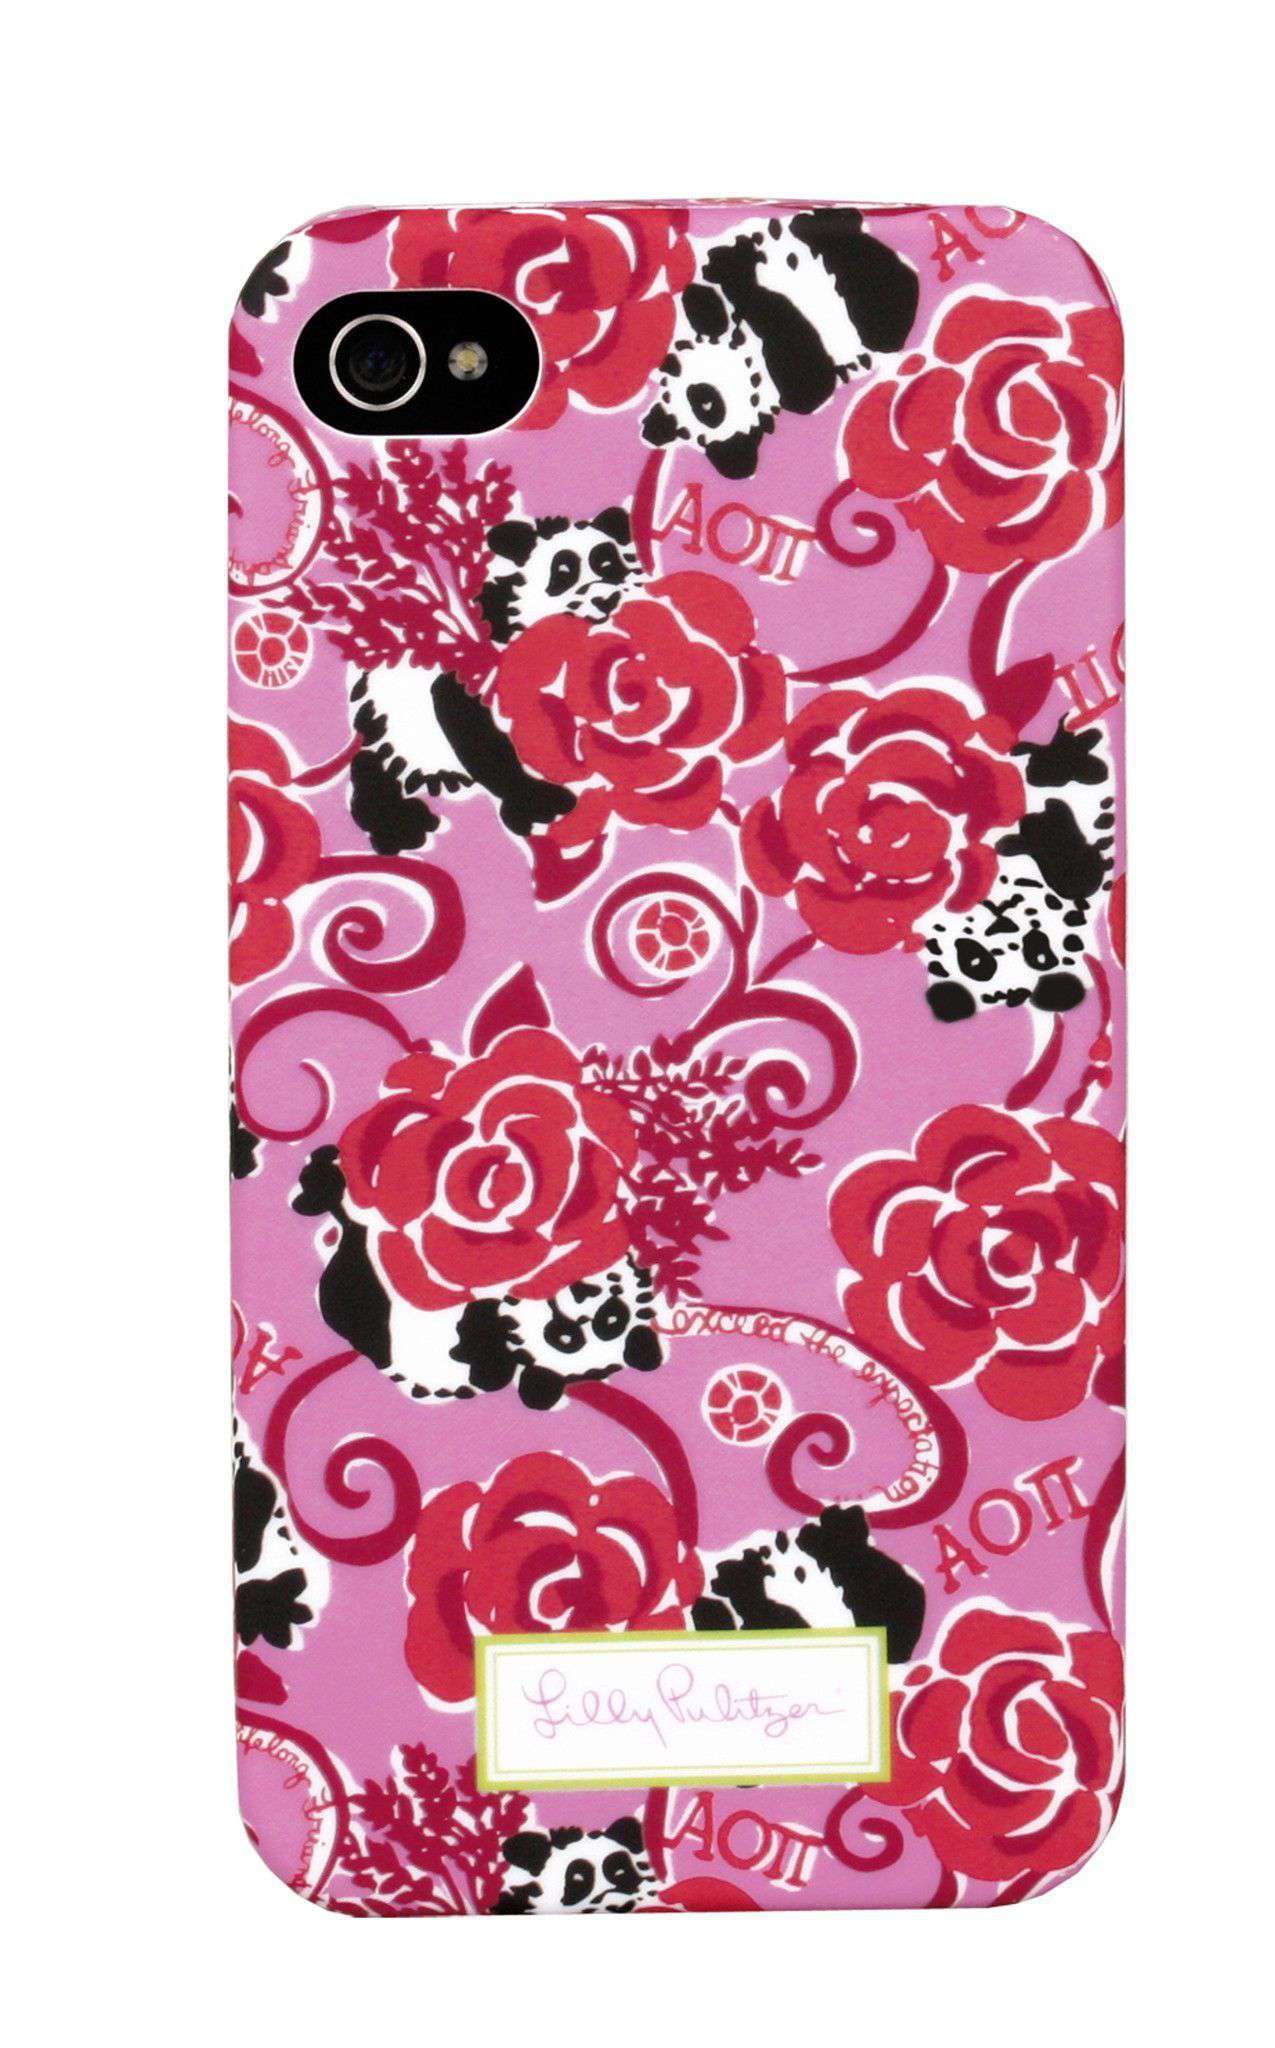 Alpha Omicron Pi iPhone 4/4s Cover by Lilly Pulitzer - Country Club Prep